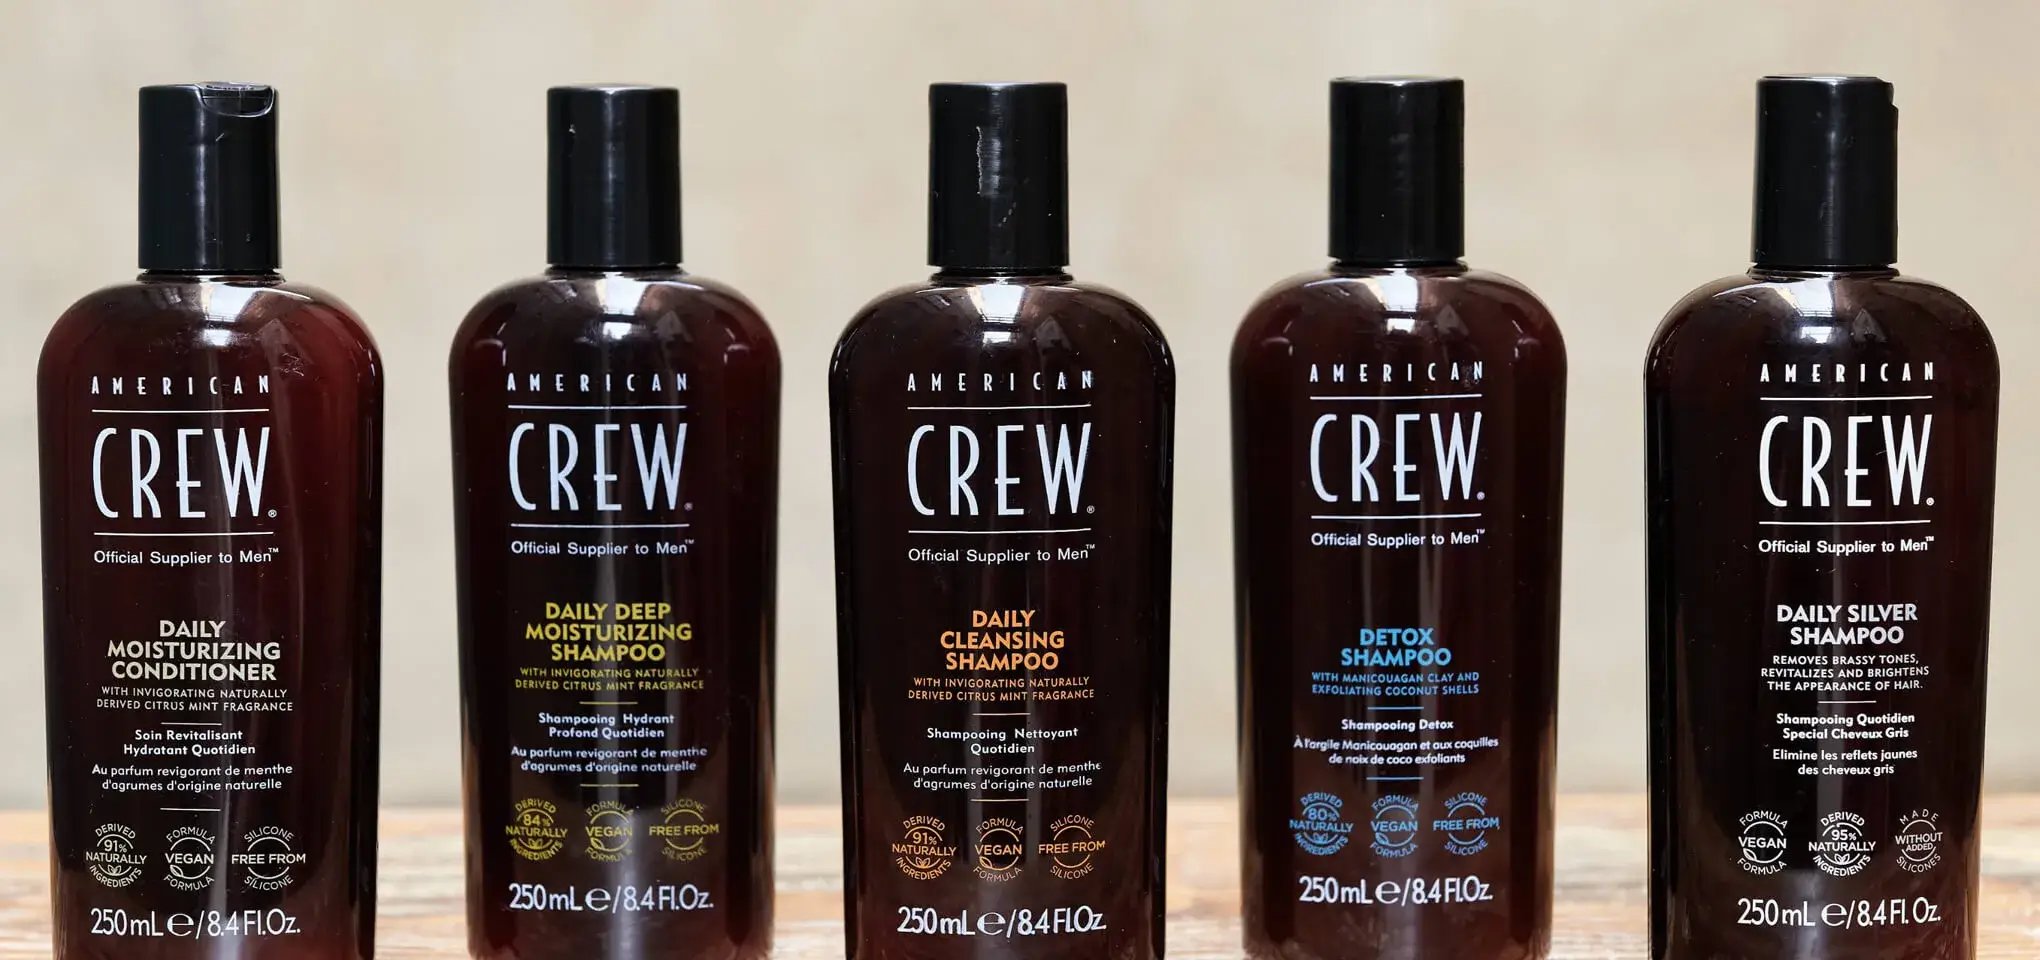 Shampoo, Conditioner and Haircare Products from American Crew